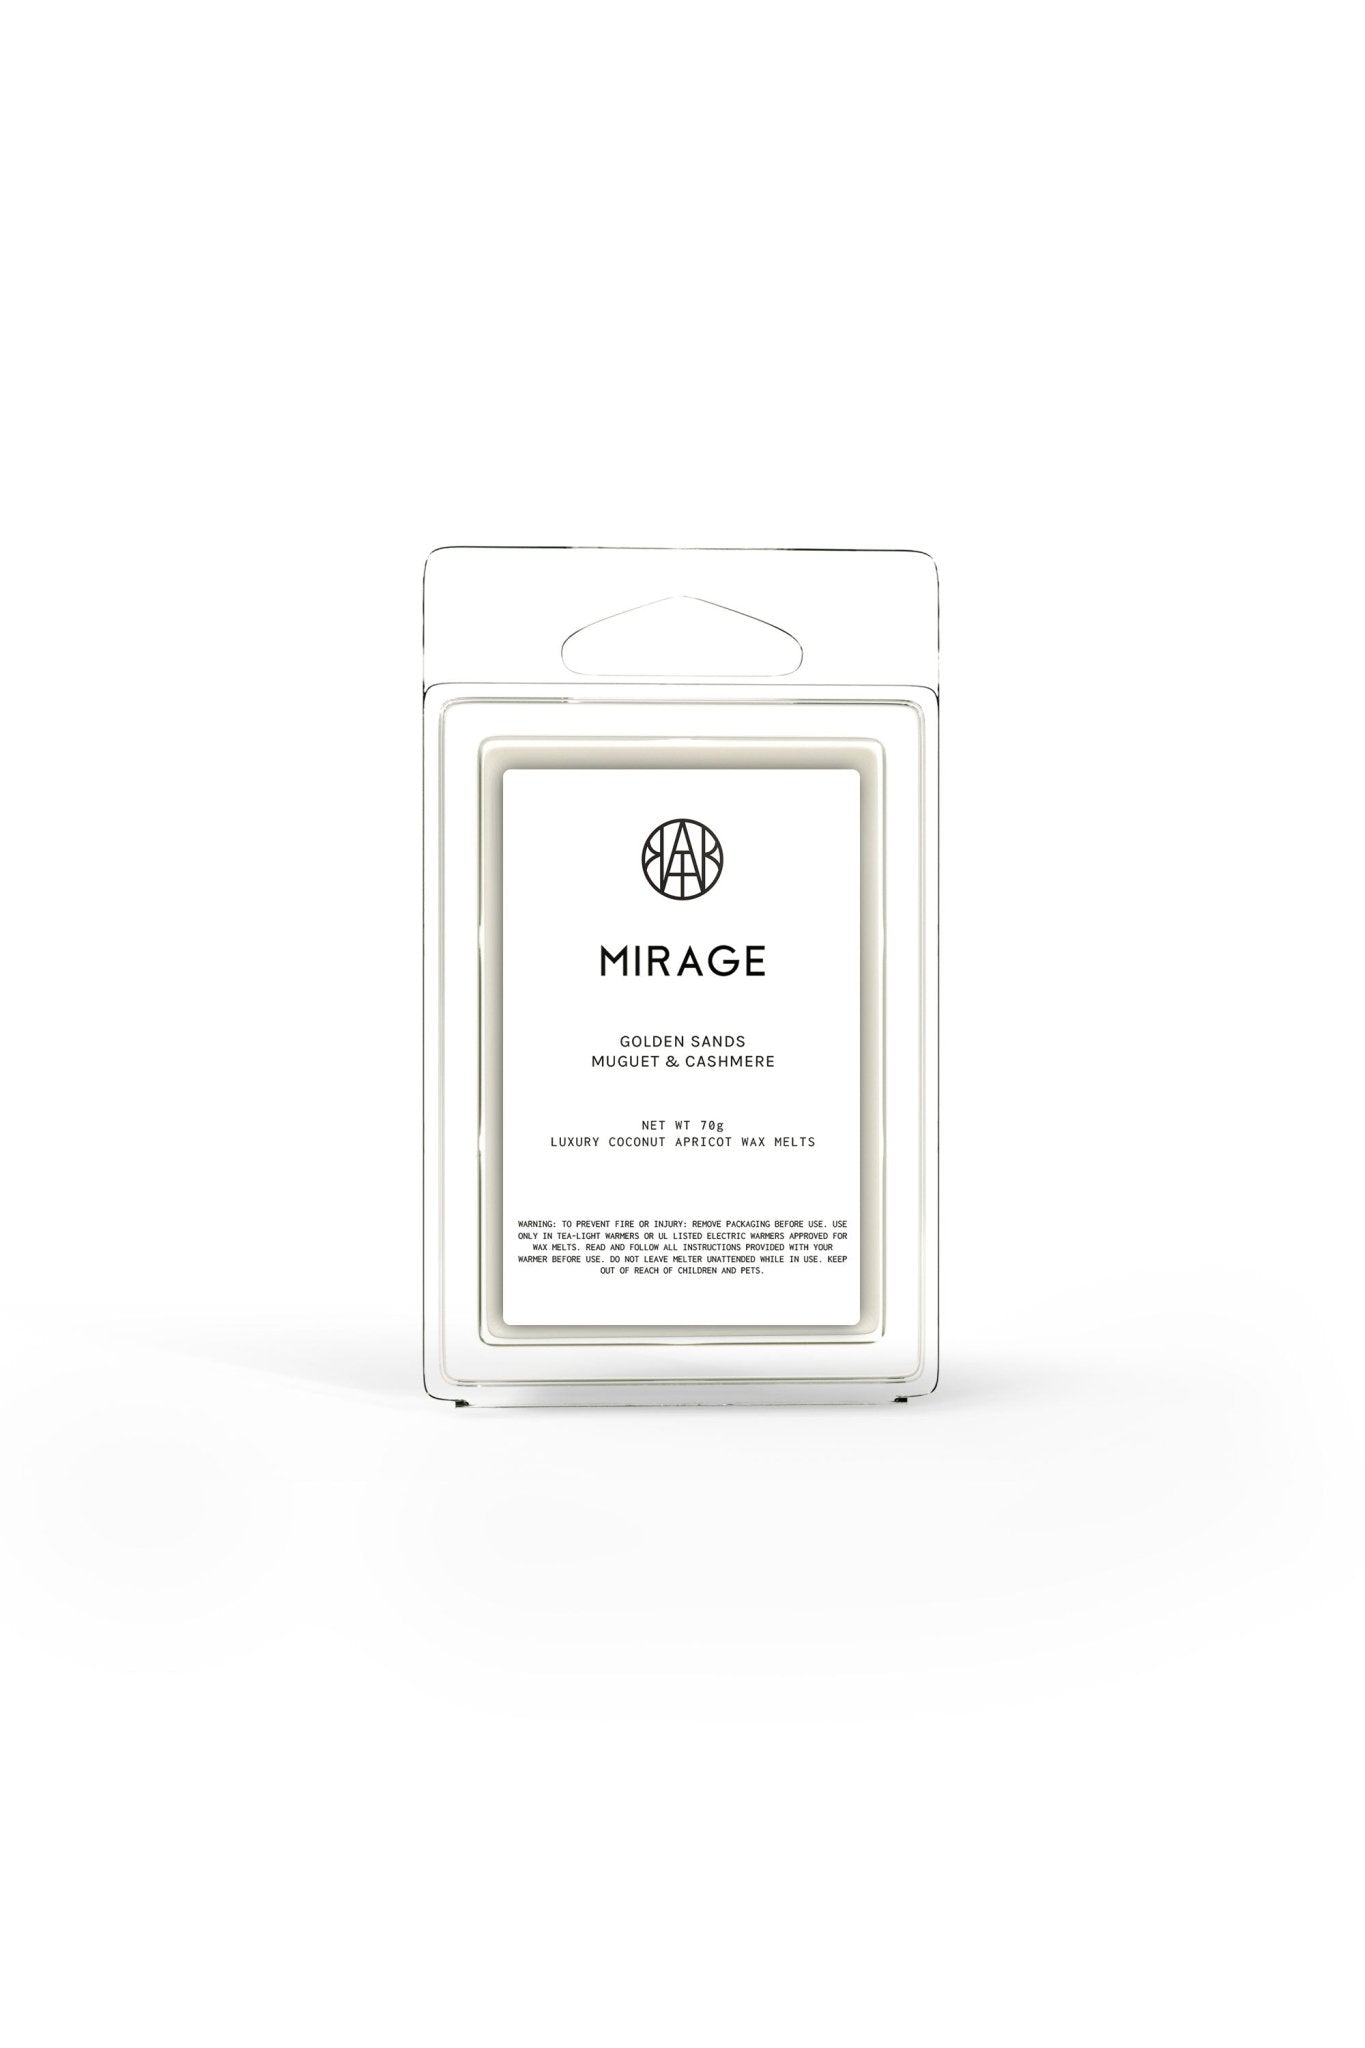 MIRAGE - Wax Melt - AEMBR - Clean Luxury Candles, Wax Melts & Laundry Care